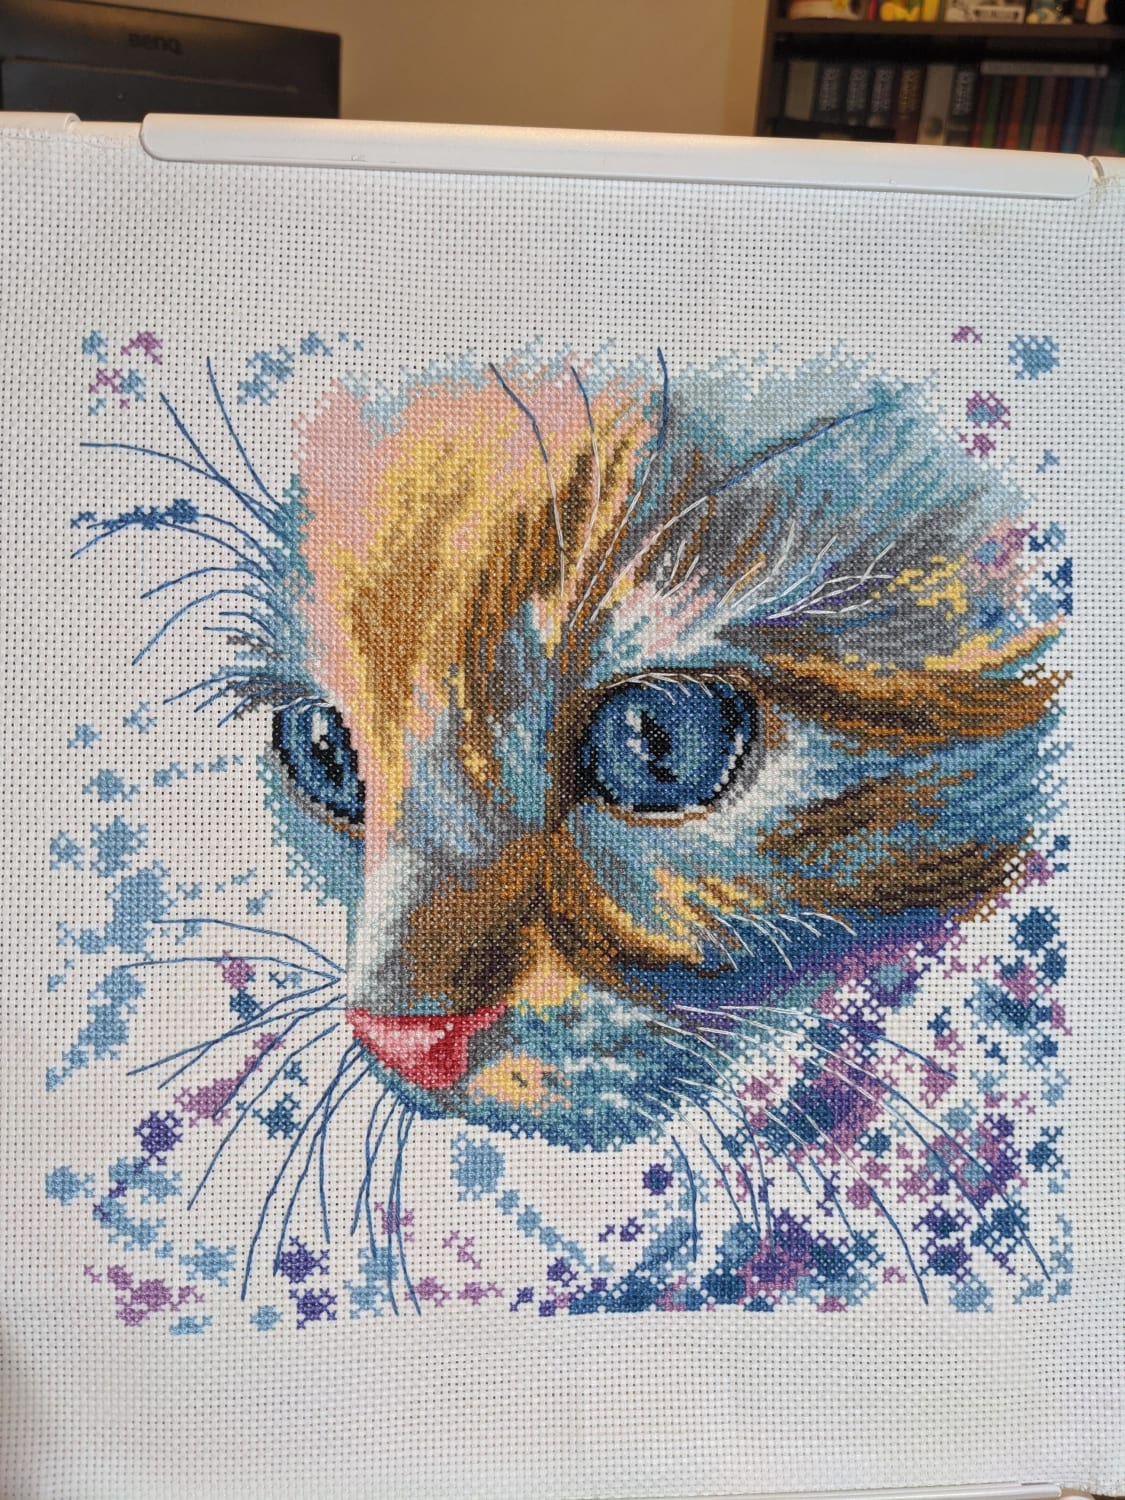 [FO] Watercolour cat by Captain Crafts. Took 1 month, my quickest project and I love it!